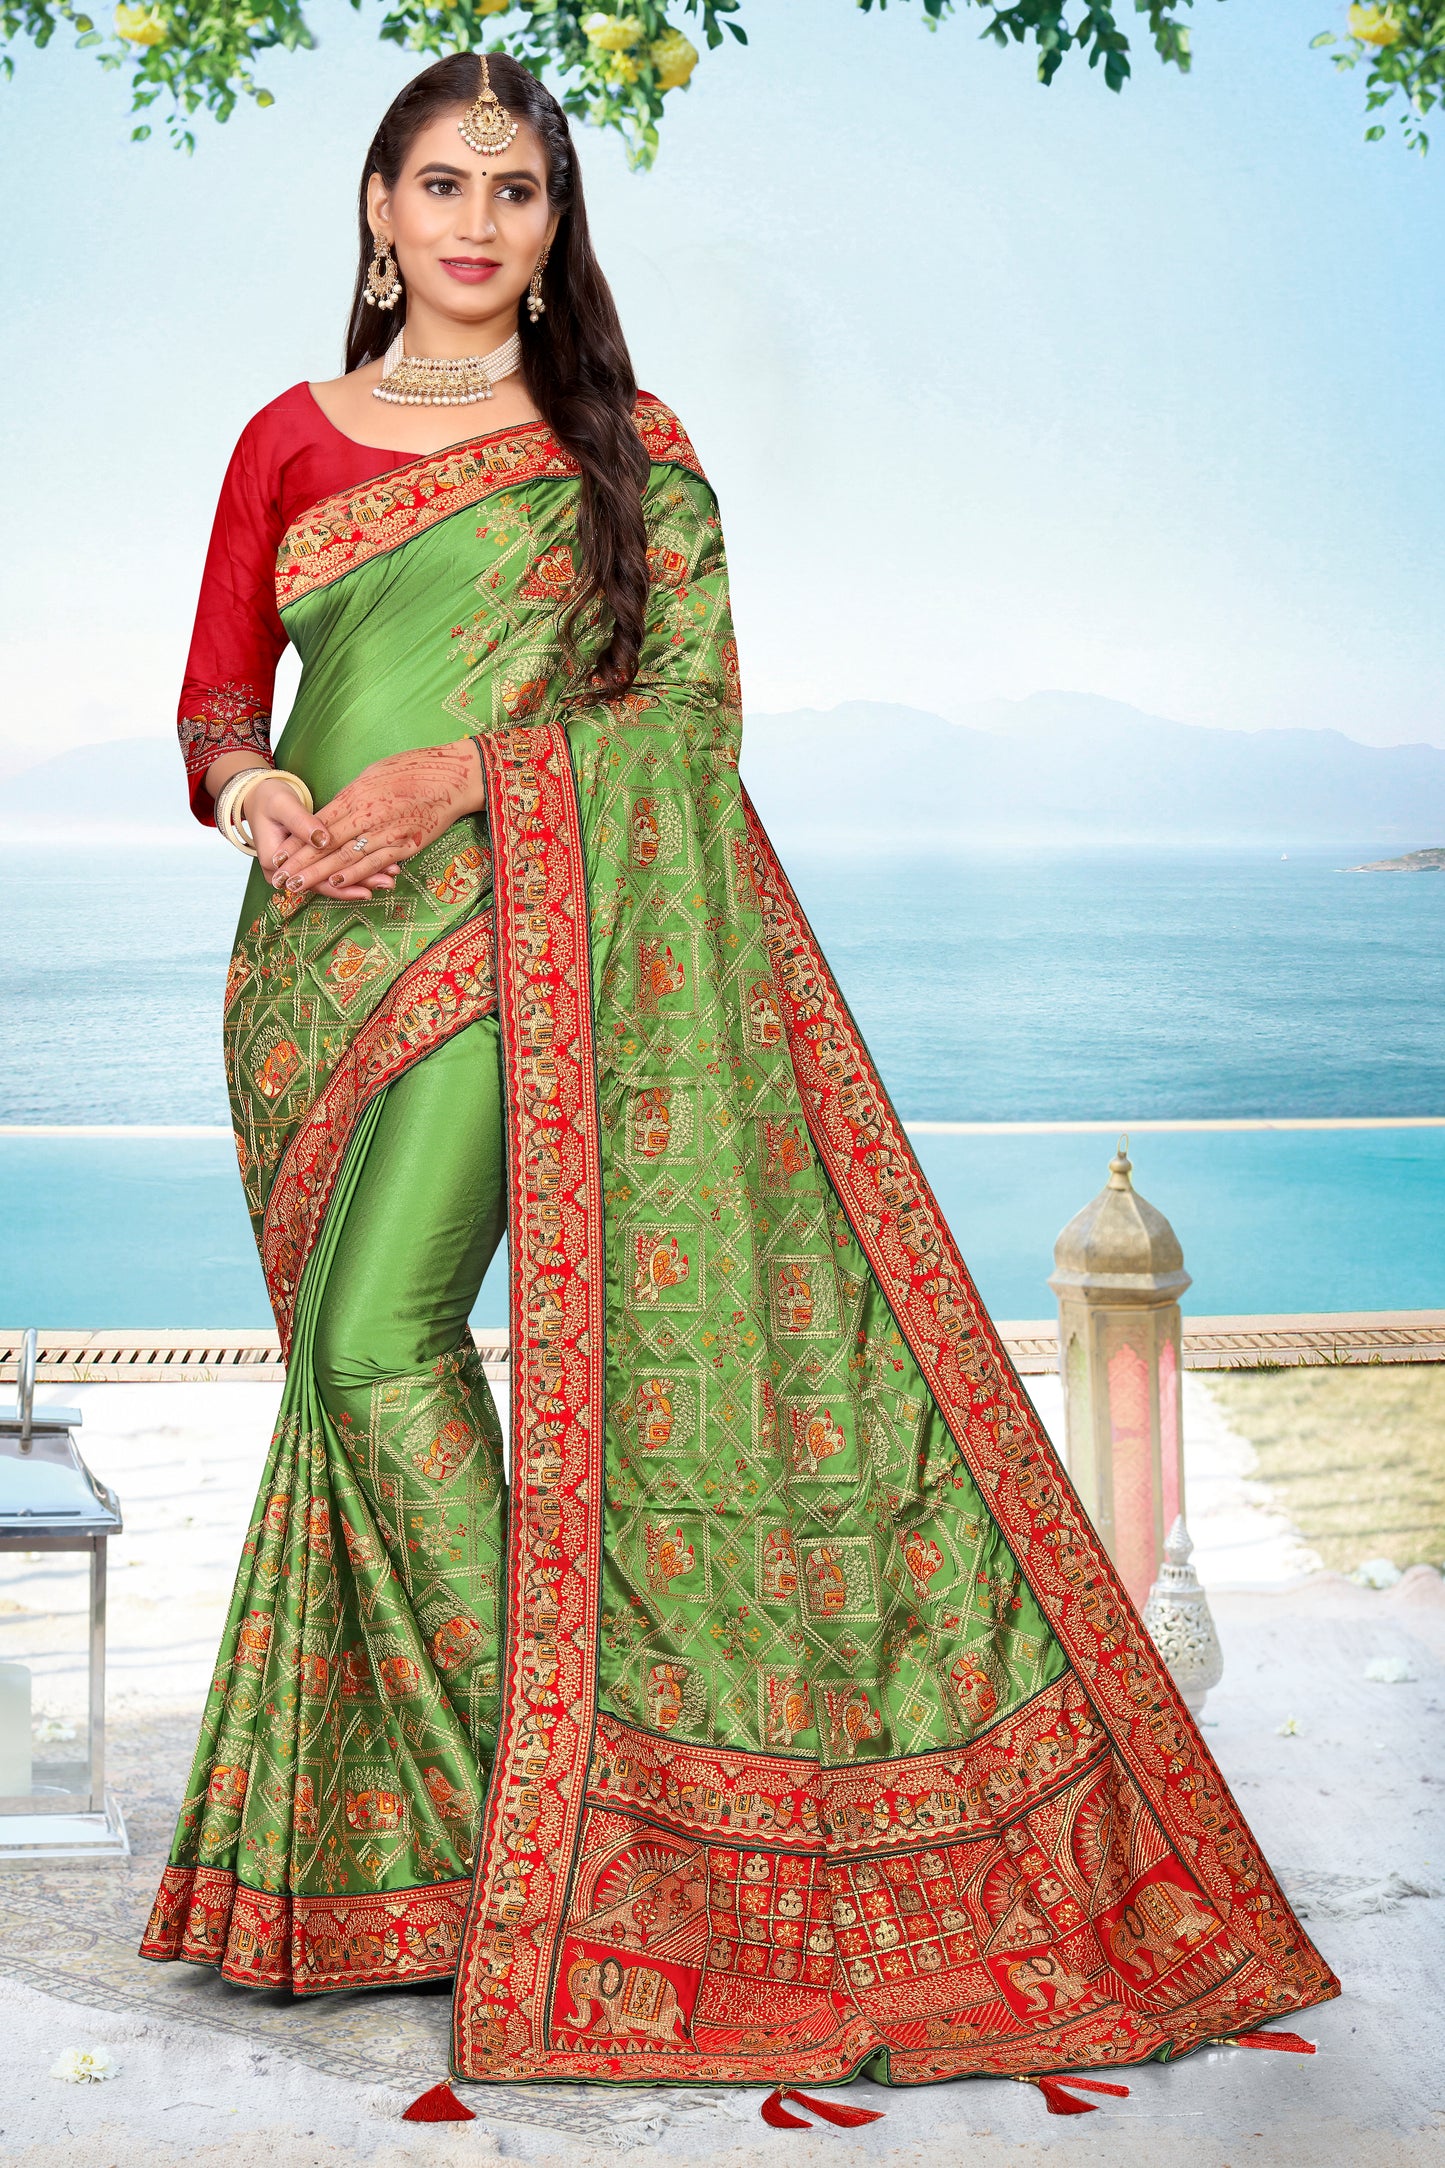 HEAVY TRADITIONAL PARROT GREEN WITH BORDER IN RED, GHARCHOLA MADE OF GAJI SILK FOR WEDDING IN 5 MORE WEDDING COLORS FOR ALL FUNCTIONS.